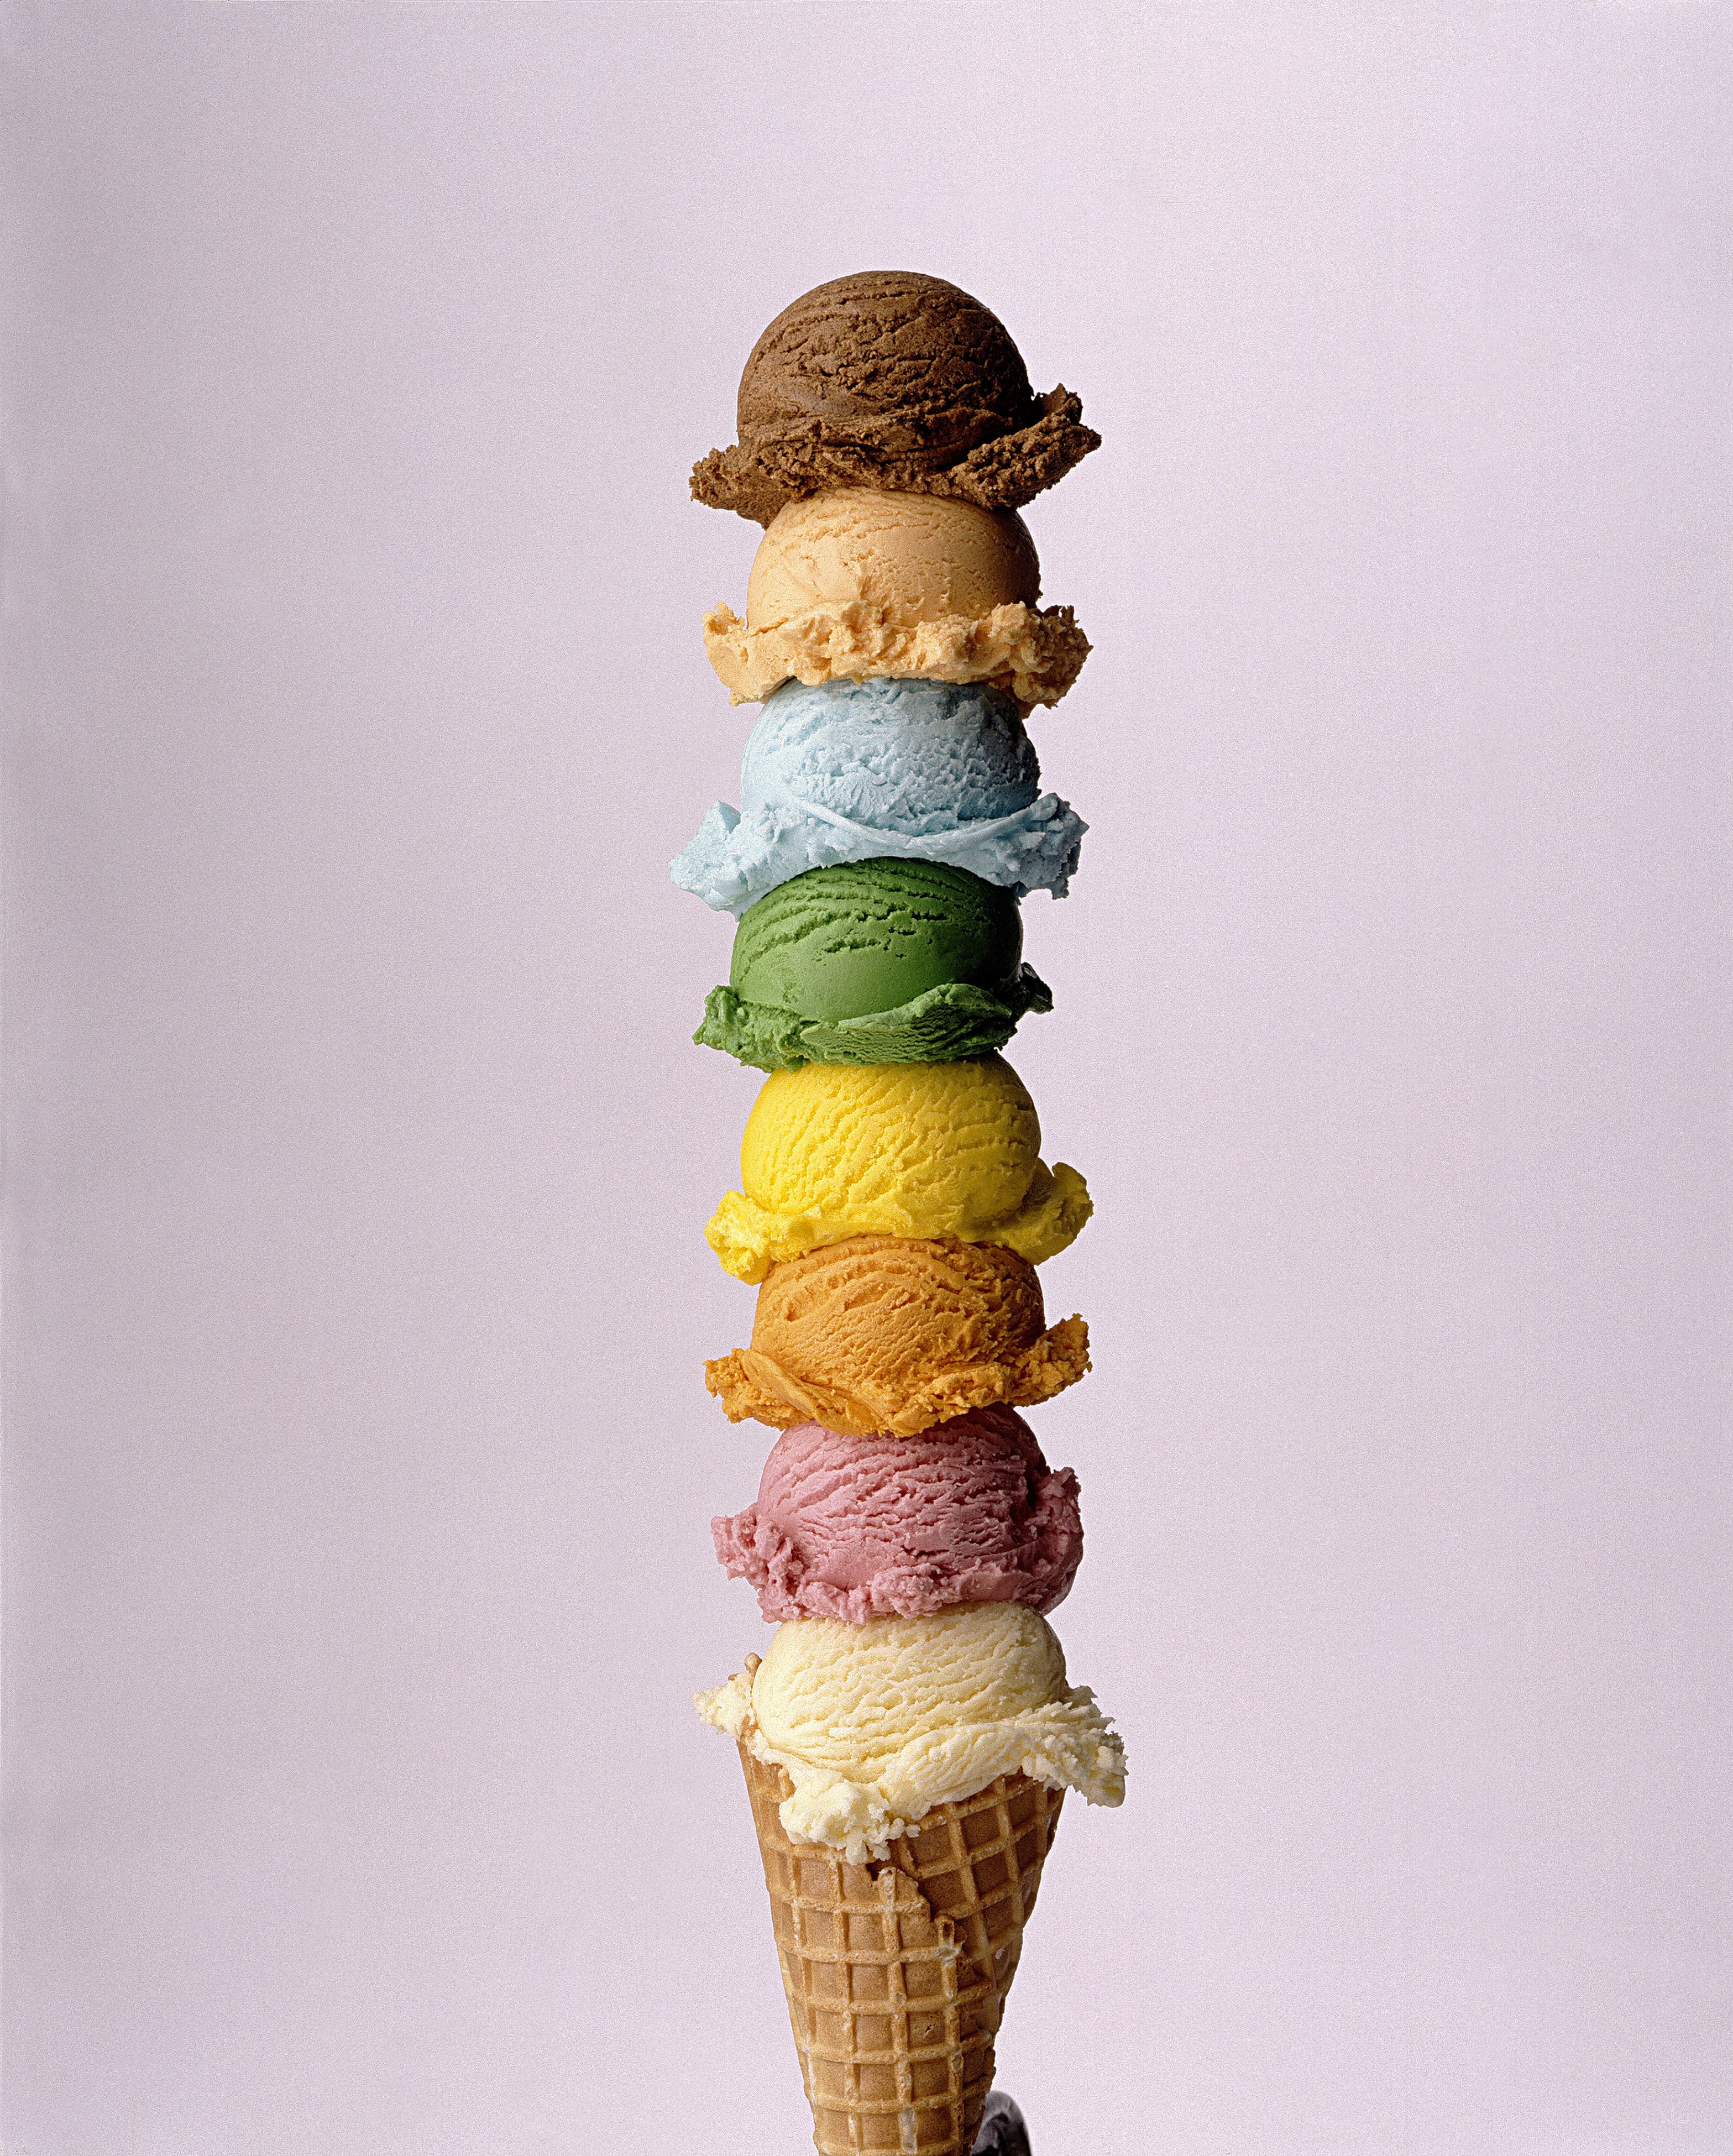 ice cream cone showing 8 different flavors